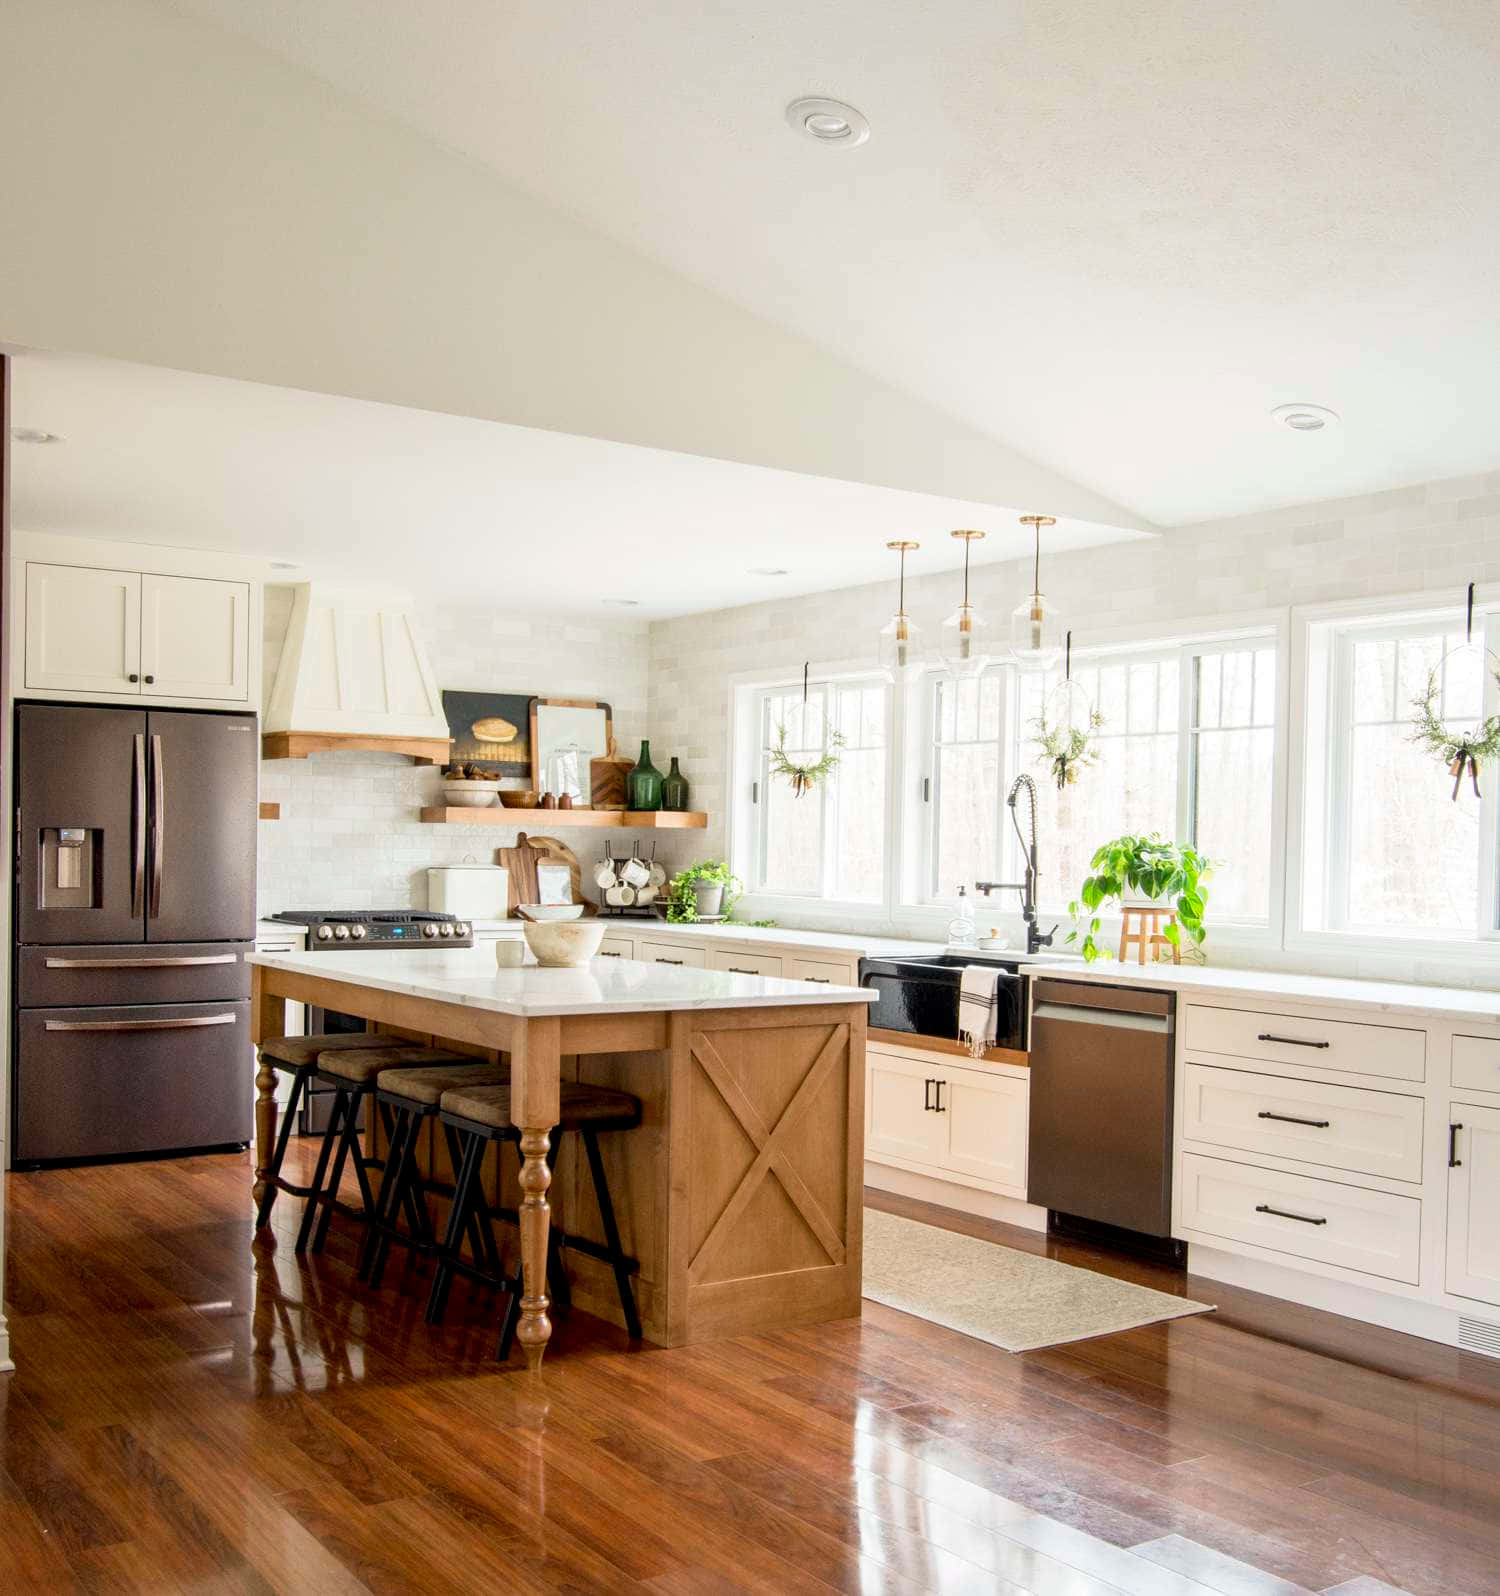 Enjoy a cup of coffee while breezing through your favorite cookbook in this bright, cozy kitchen